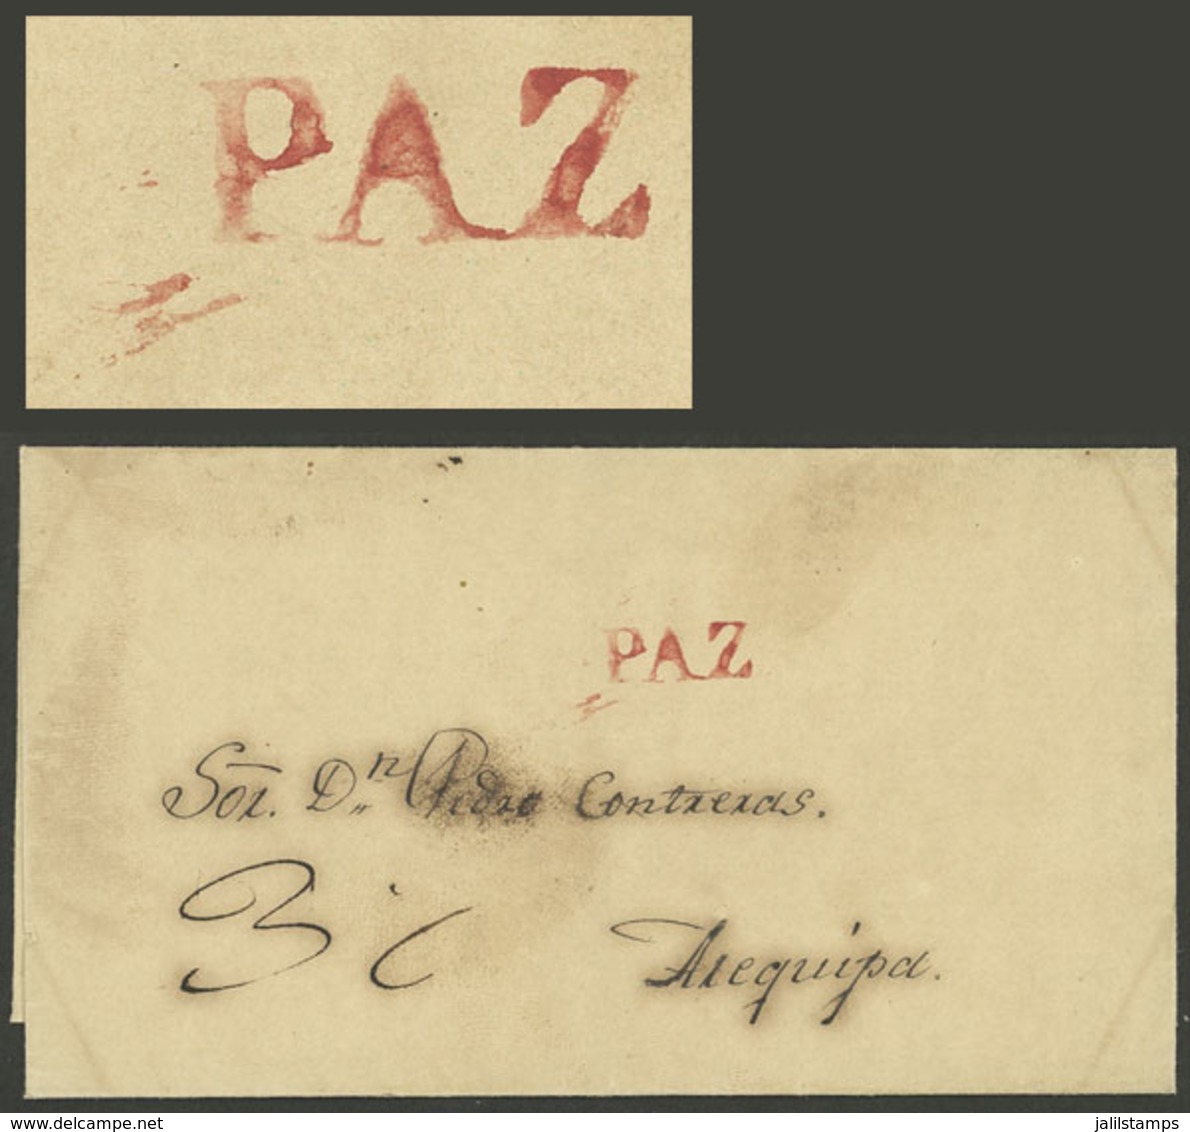 BOLIVIA: Folded Cover Sent To Arequipa, With "3" Rating In Pen And PAZ Mark (16.5 X 7 Mm) Perfectly Applied, In Red, Exc - Bolivien